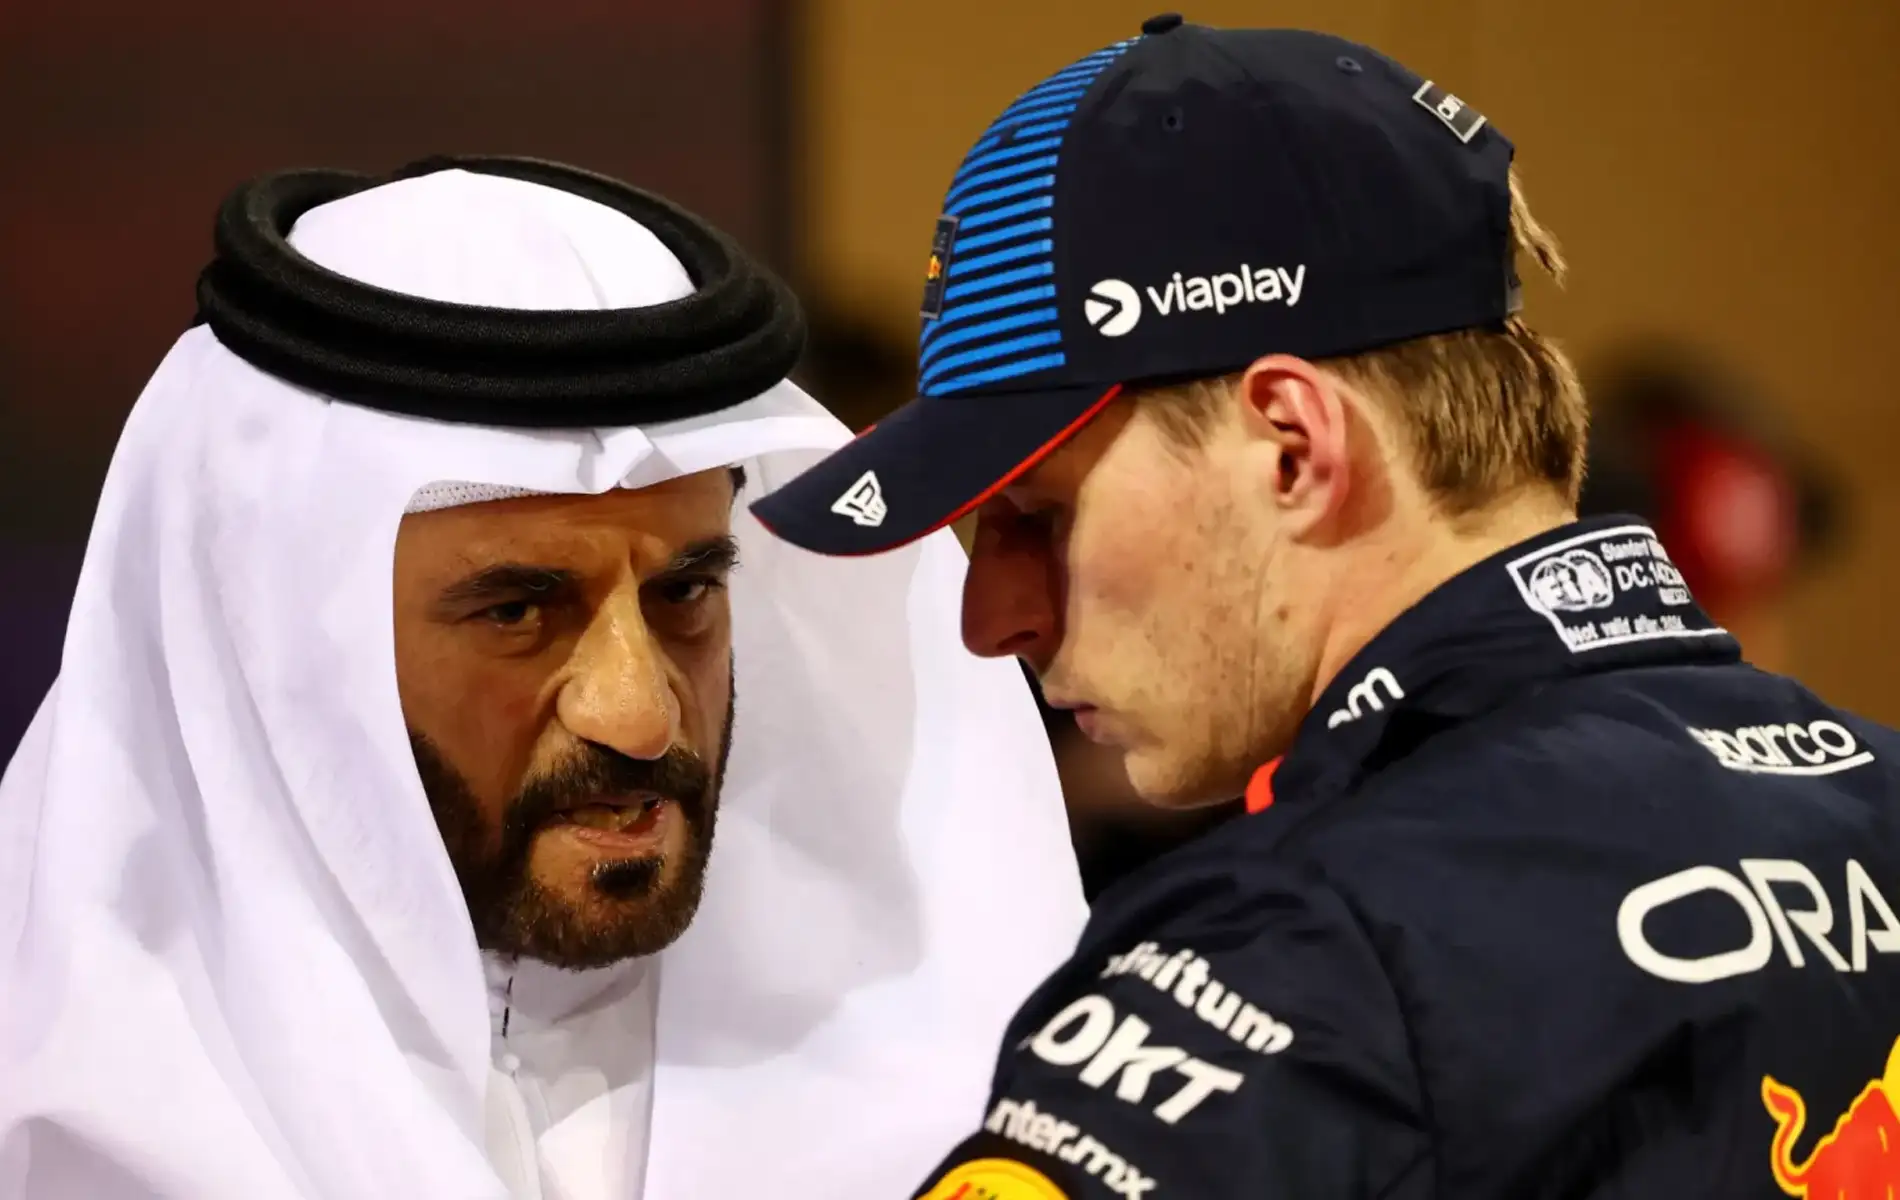 New Allegations Against Mohammed Ben Sulayem Over Las Vegas GP